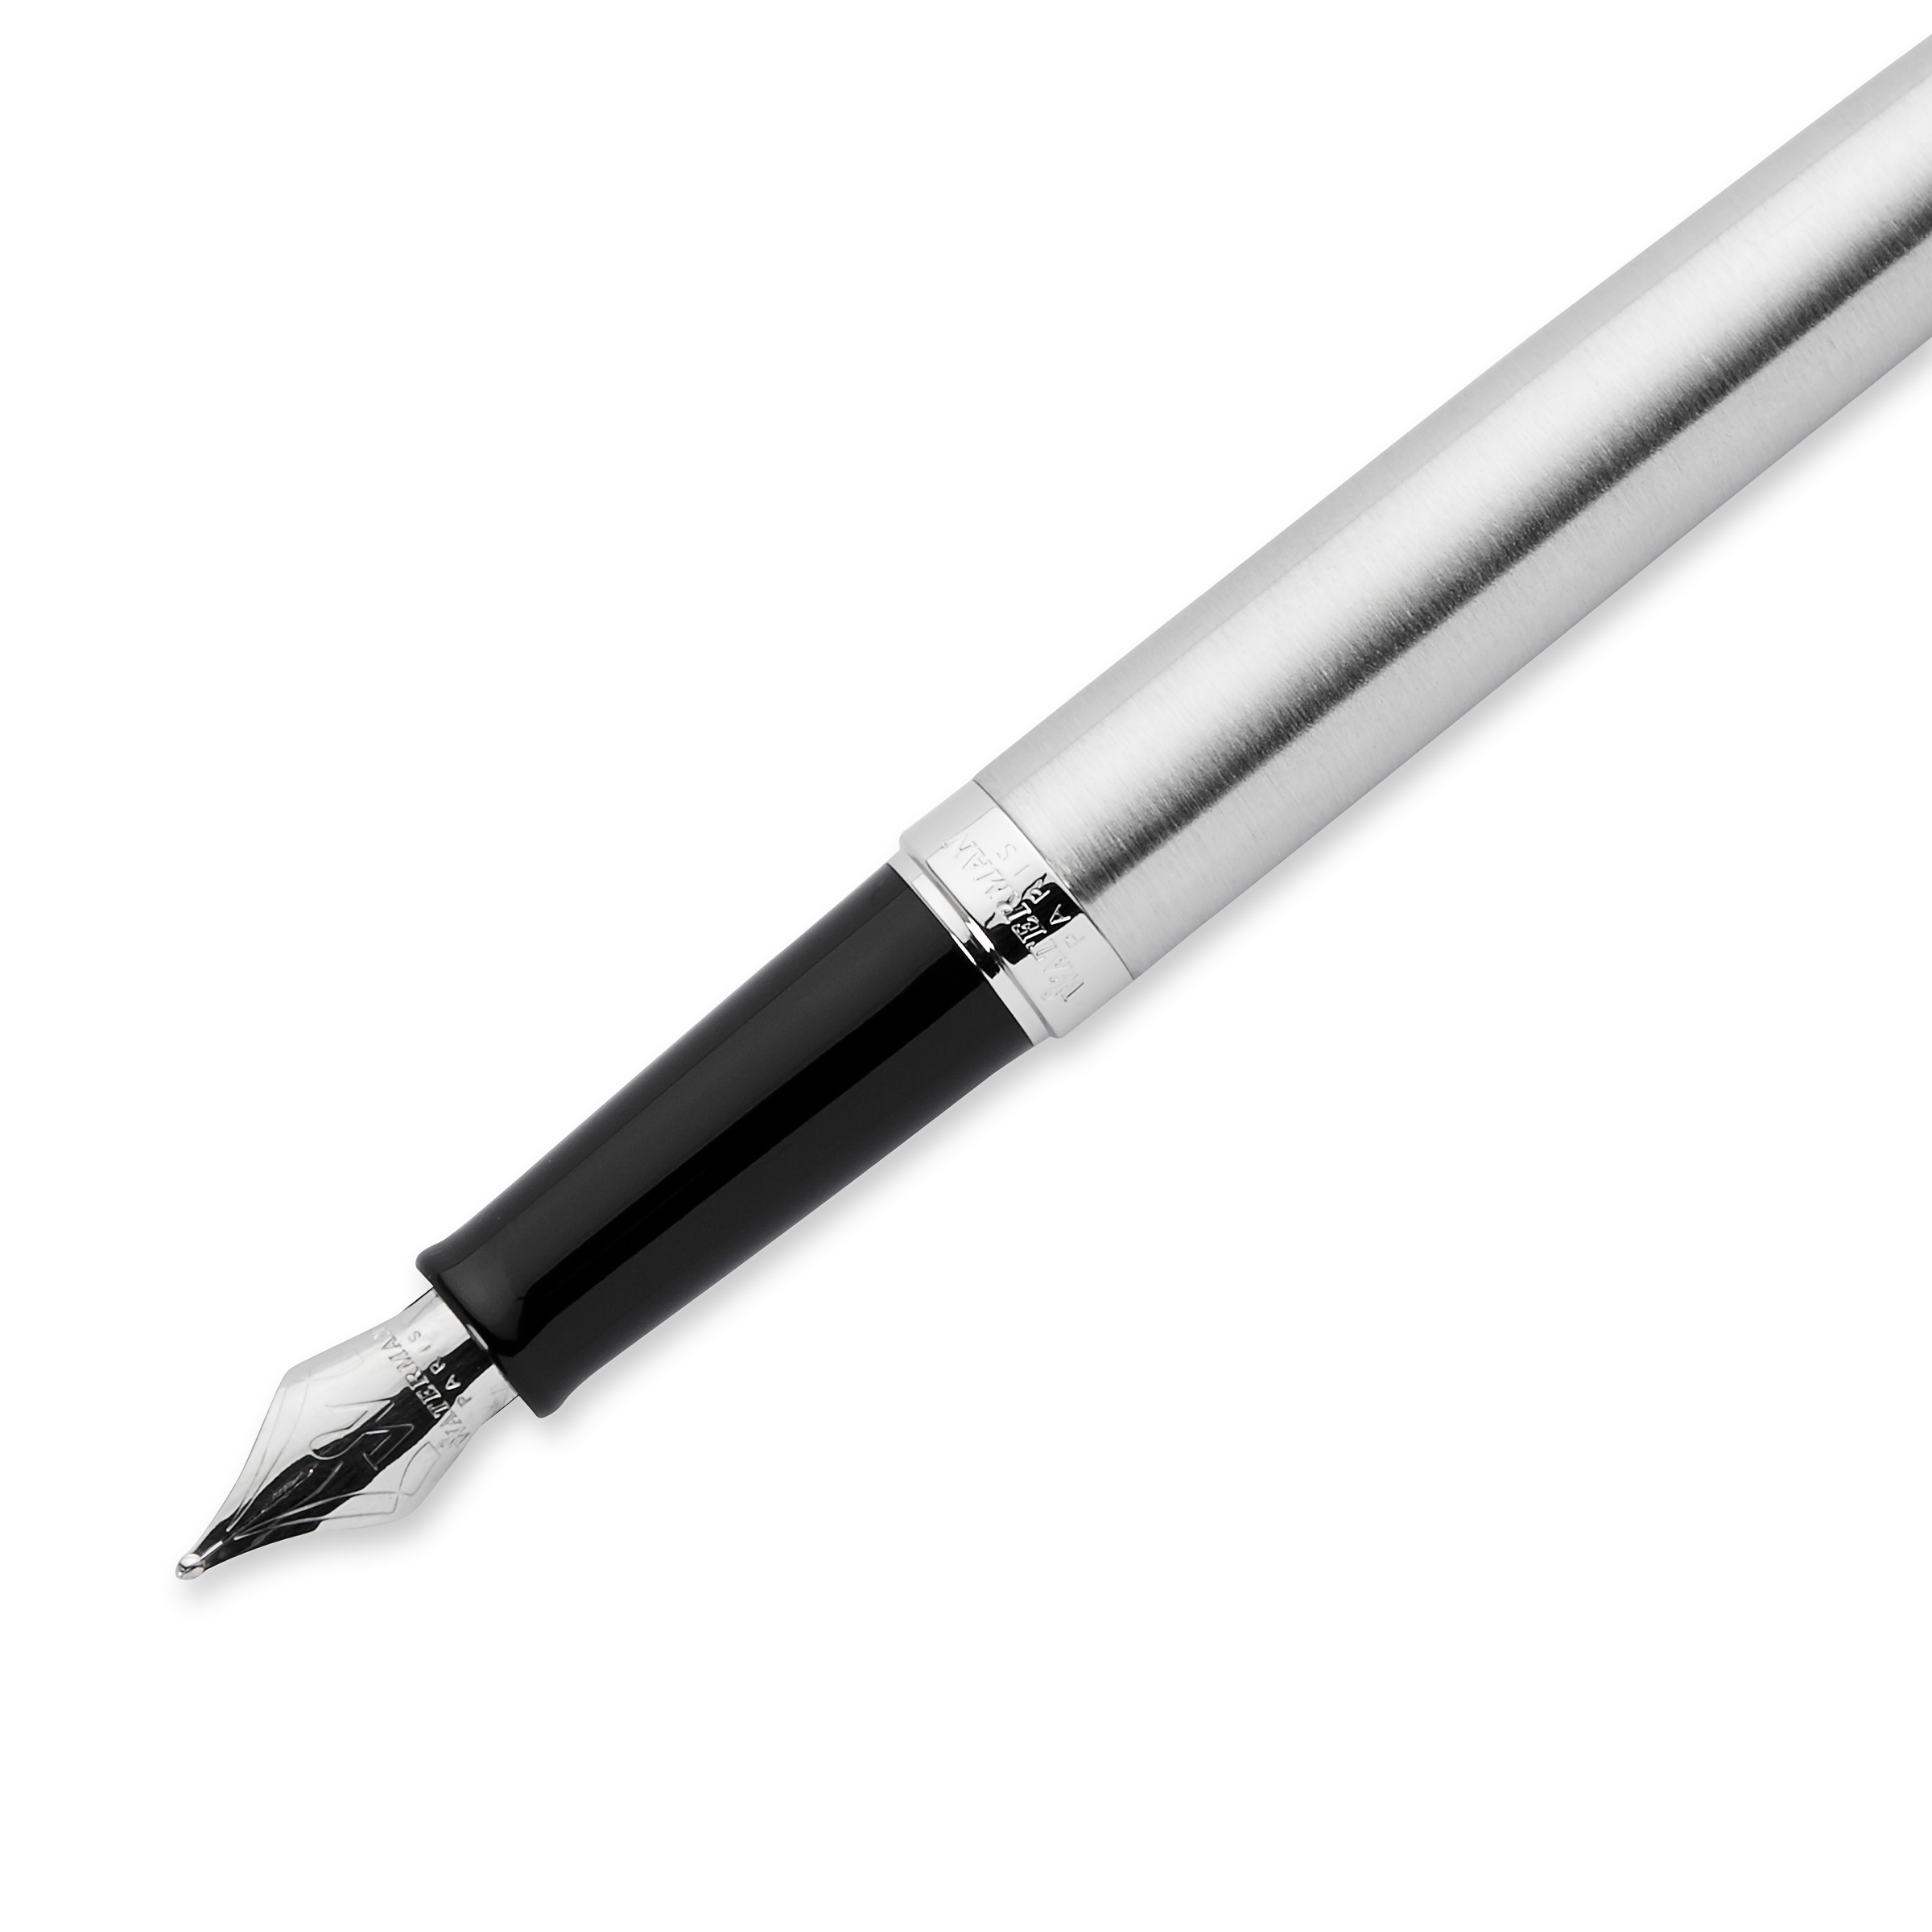 Waterman Hemisphere Stainless Steel Chrome Trim Fountain Pen - Pencraft the boutique